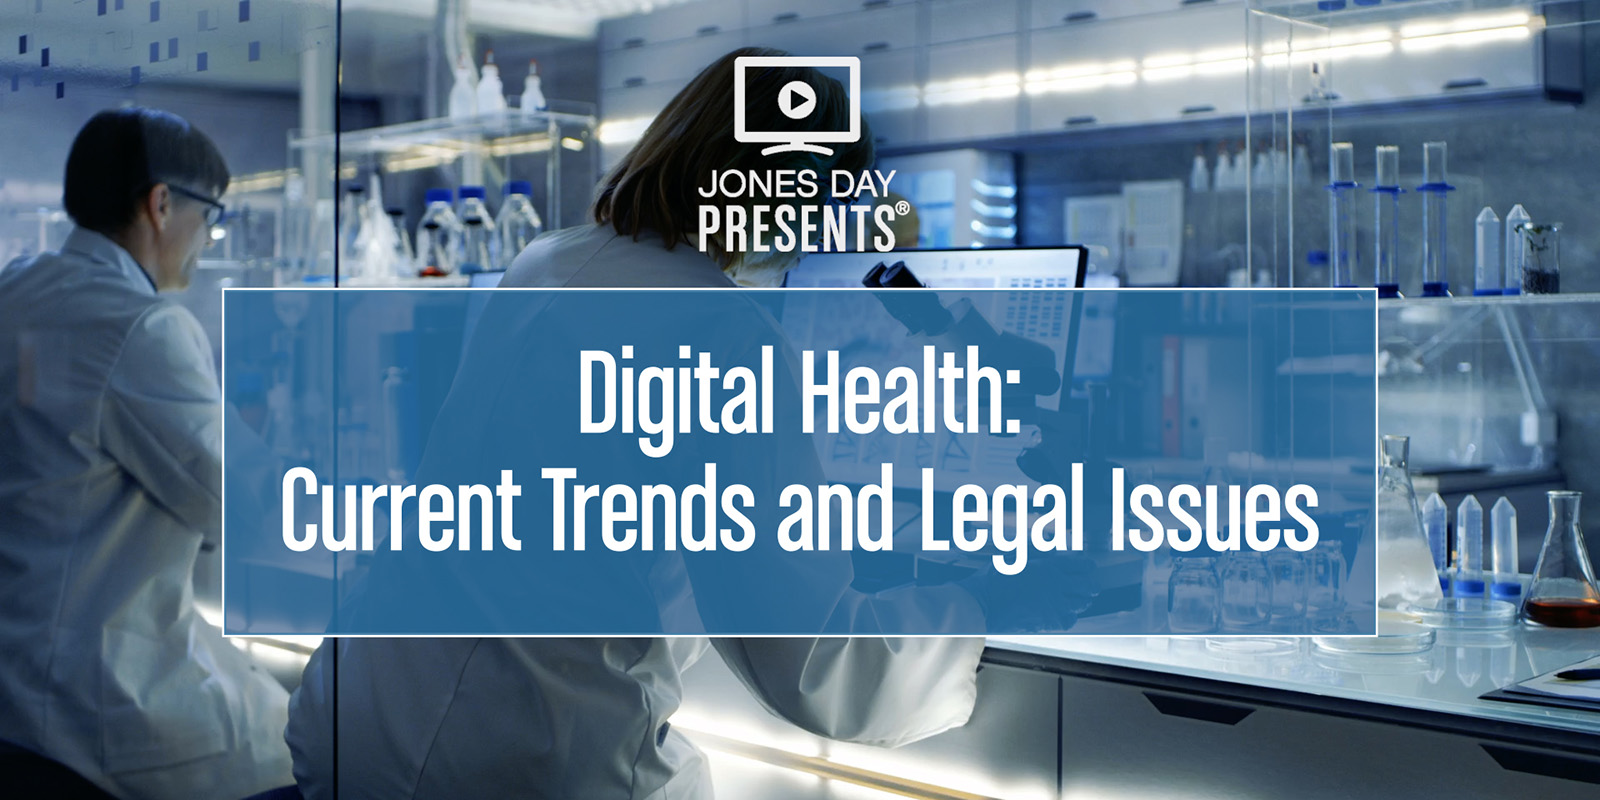 JONES DAY PRESENTS Digital Health: Current Trends and Legal Issues